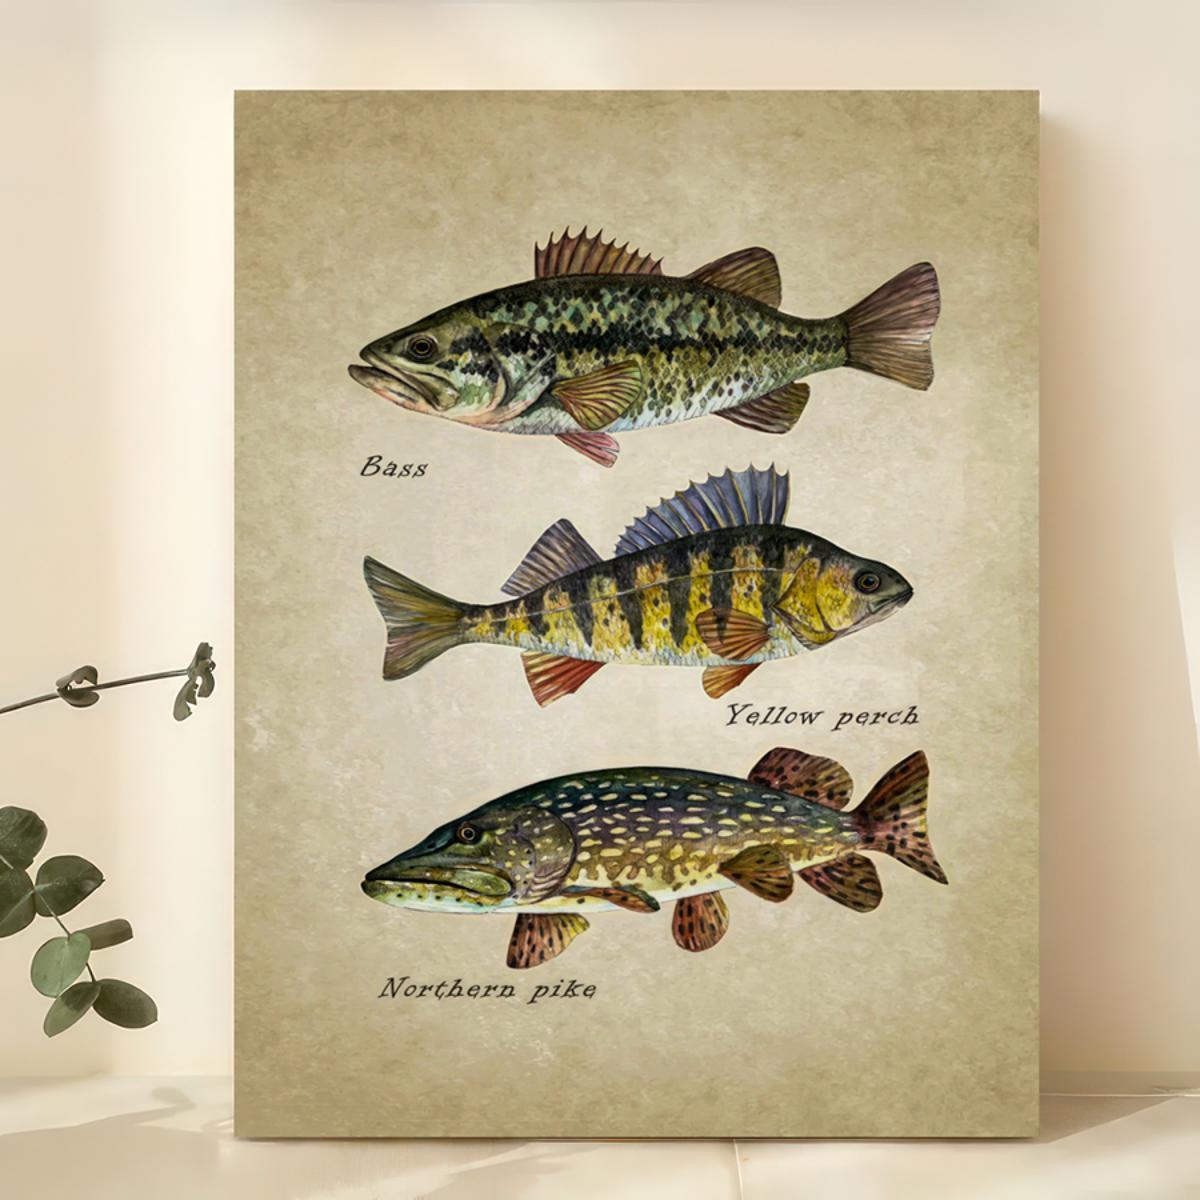 Wisconsin, Fish All Day, Bass (12x18 Wall Art Poster, Room Decor